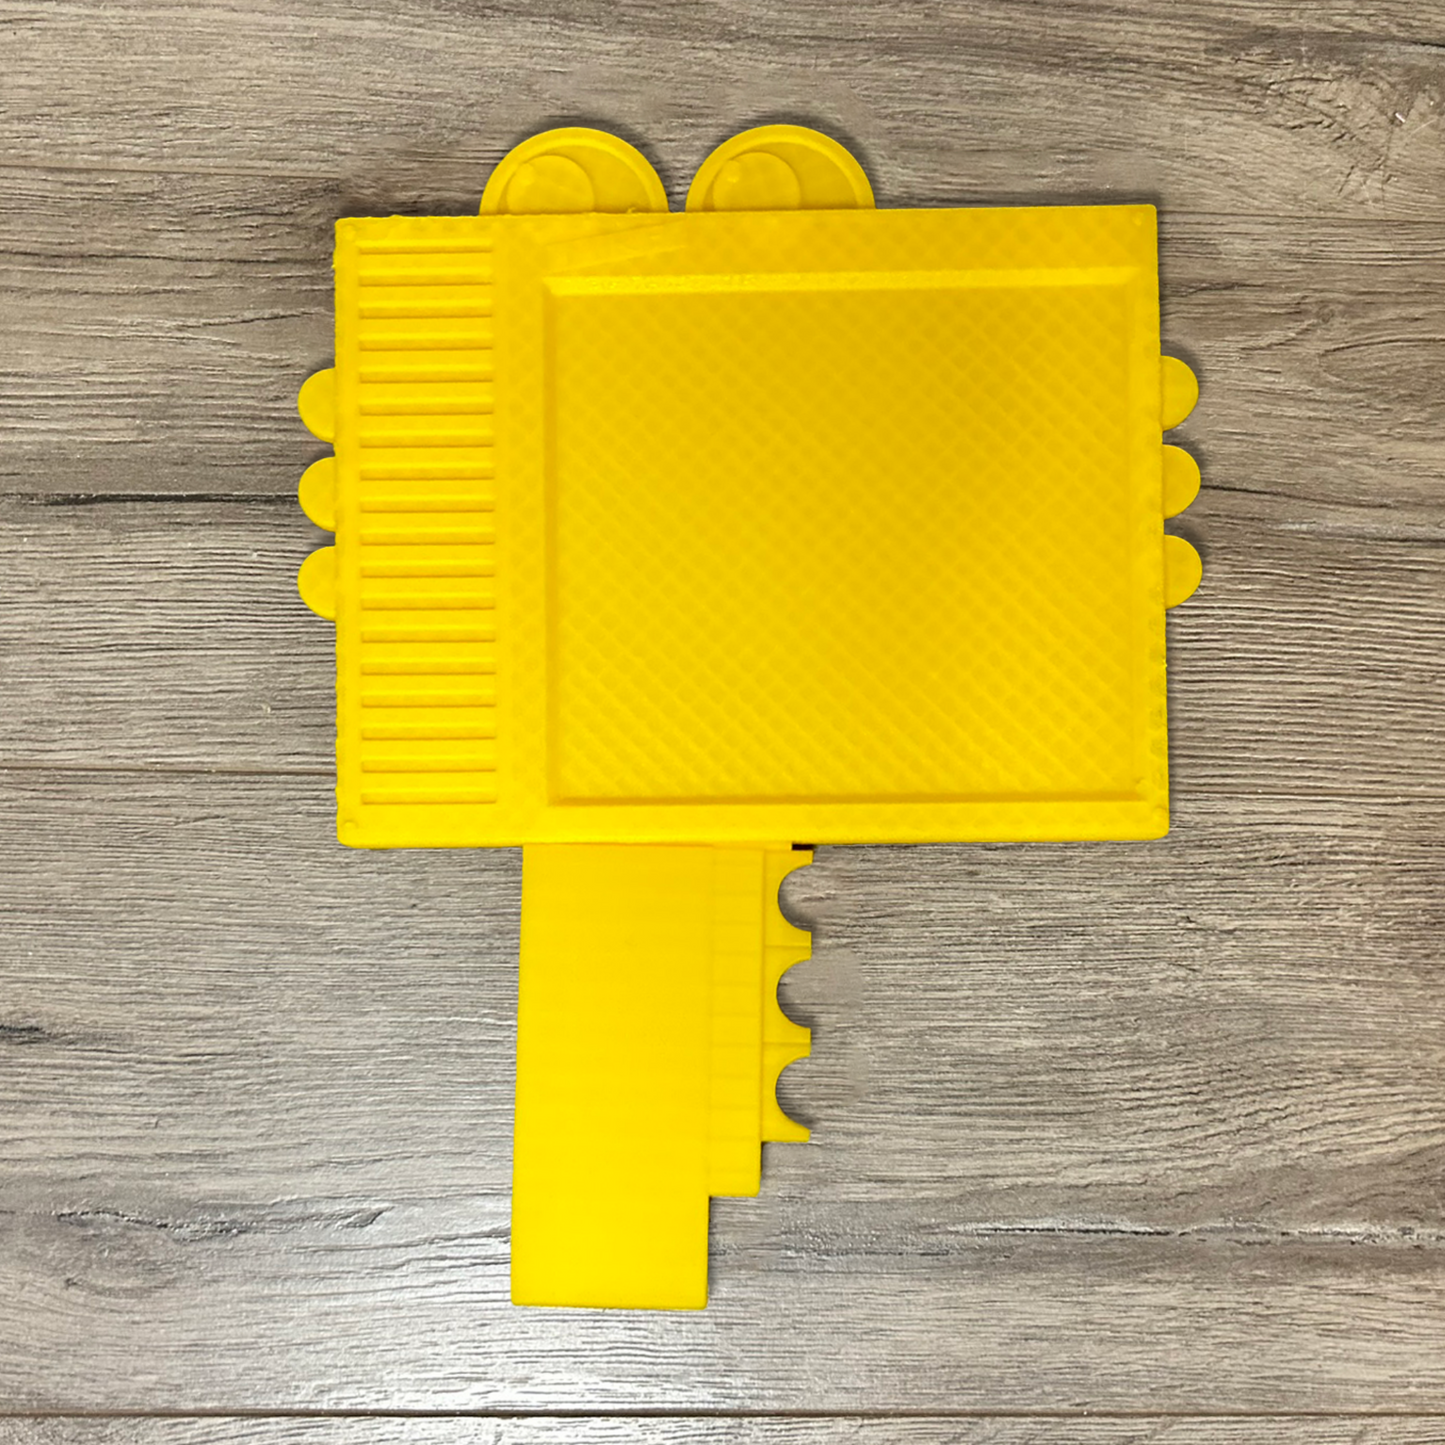 Handunit 3D Printed Kit for Cosplay | Inspired by Five Nights at Freddy's